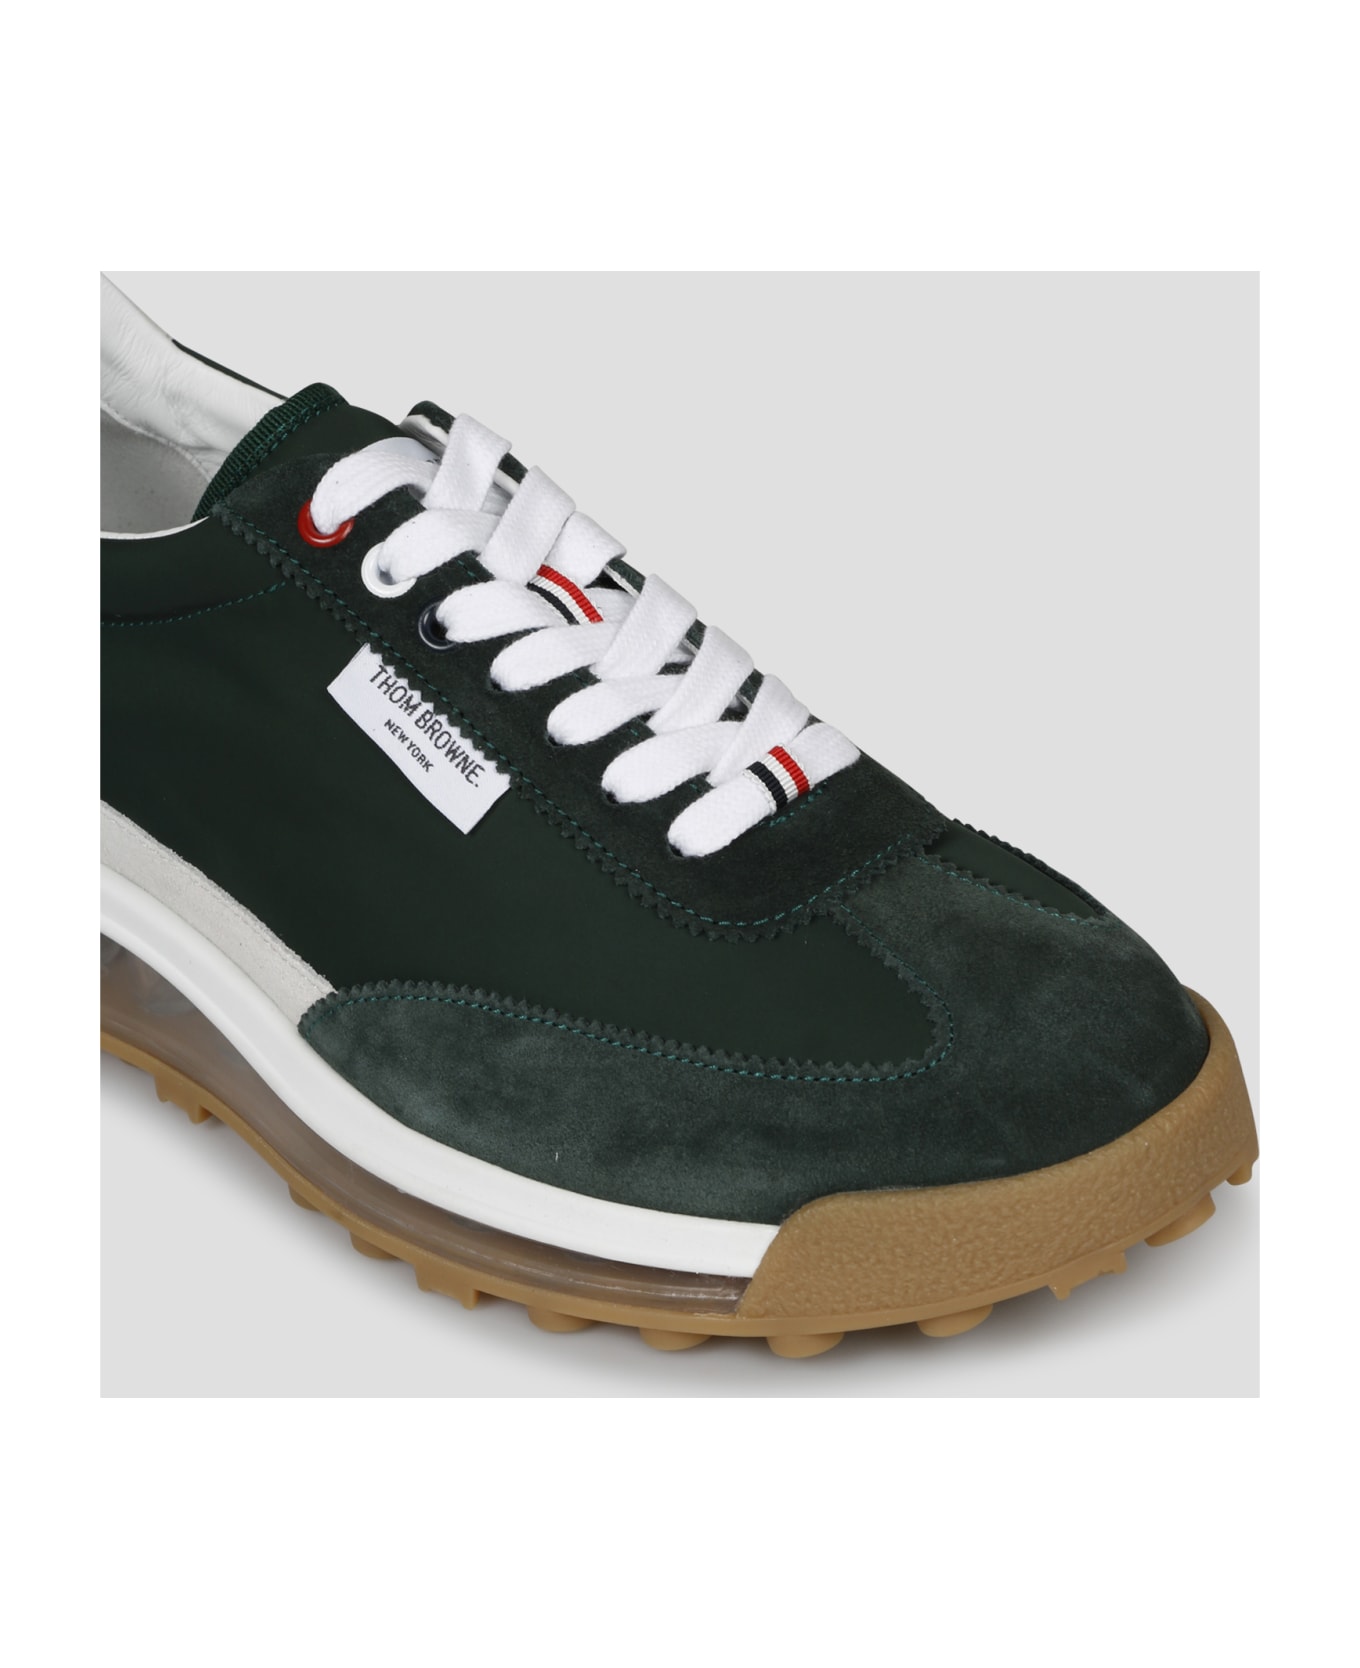 Thom Browne Tech Runner Shoes - Green